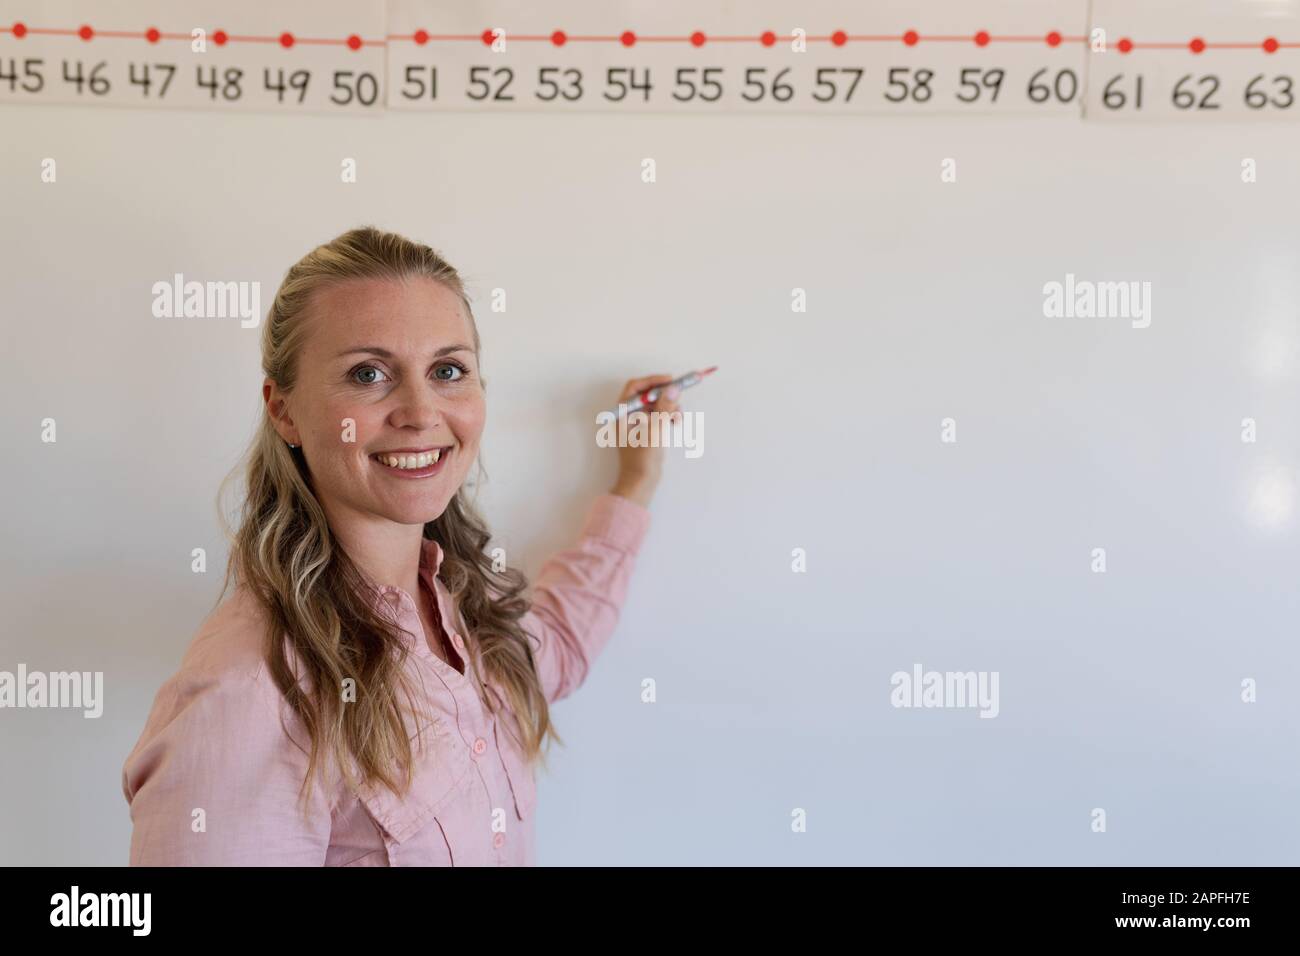 Female teacher with long blonde hair standing at a white board Stock Photo